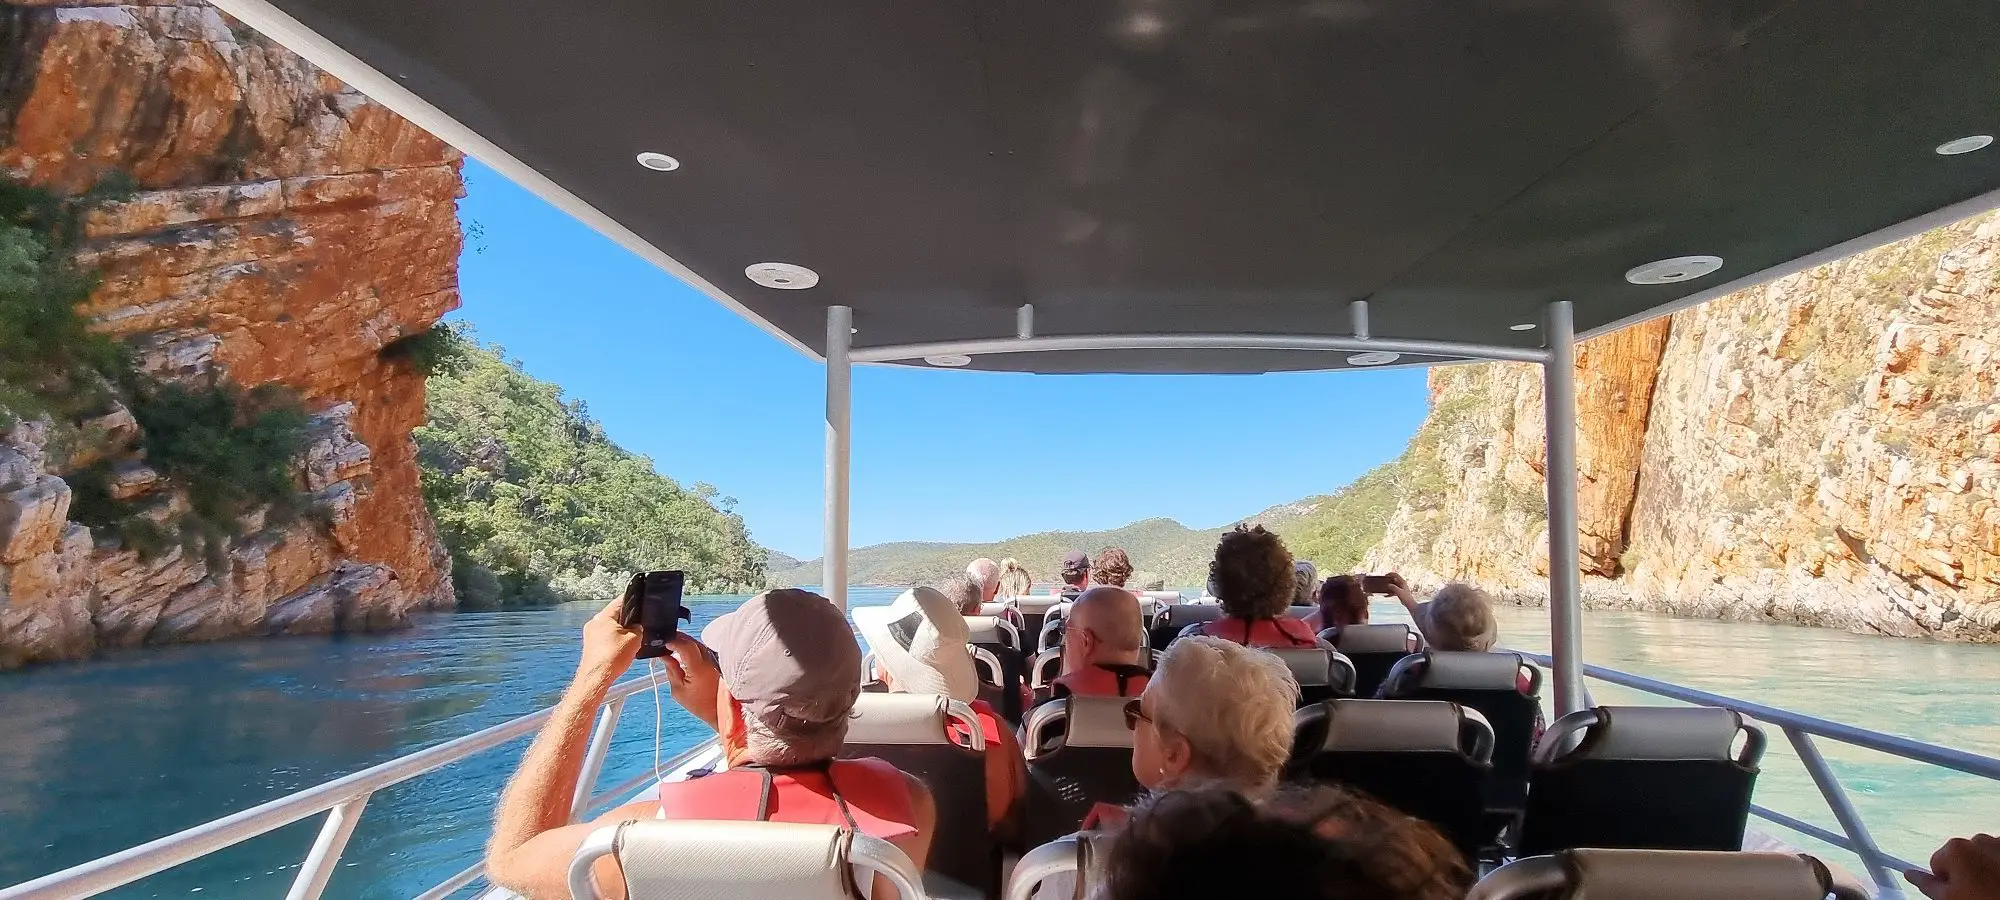 in the boat showing people in front as we cruise through Cyclone creek